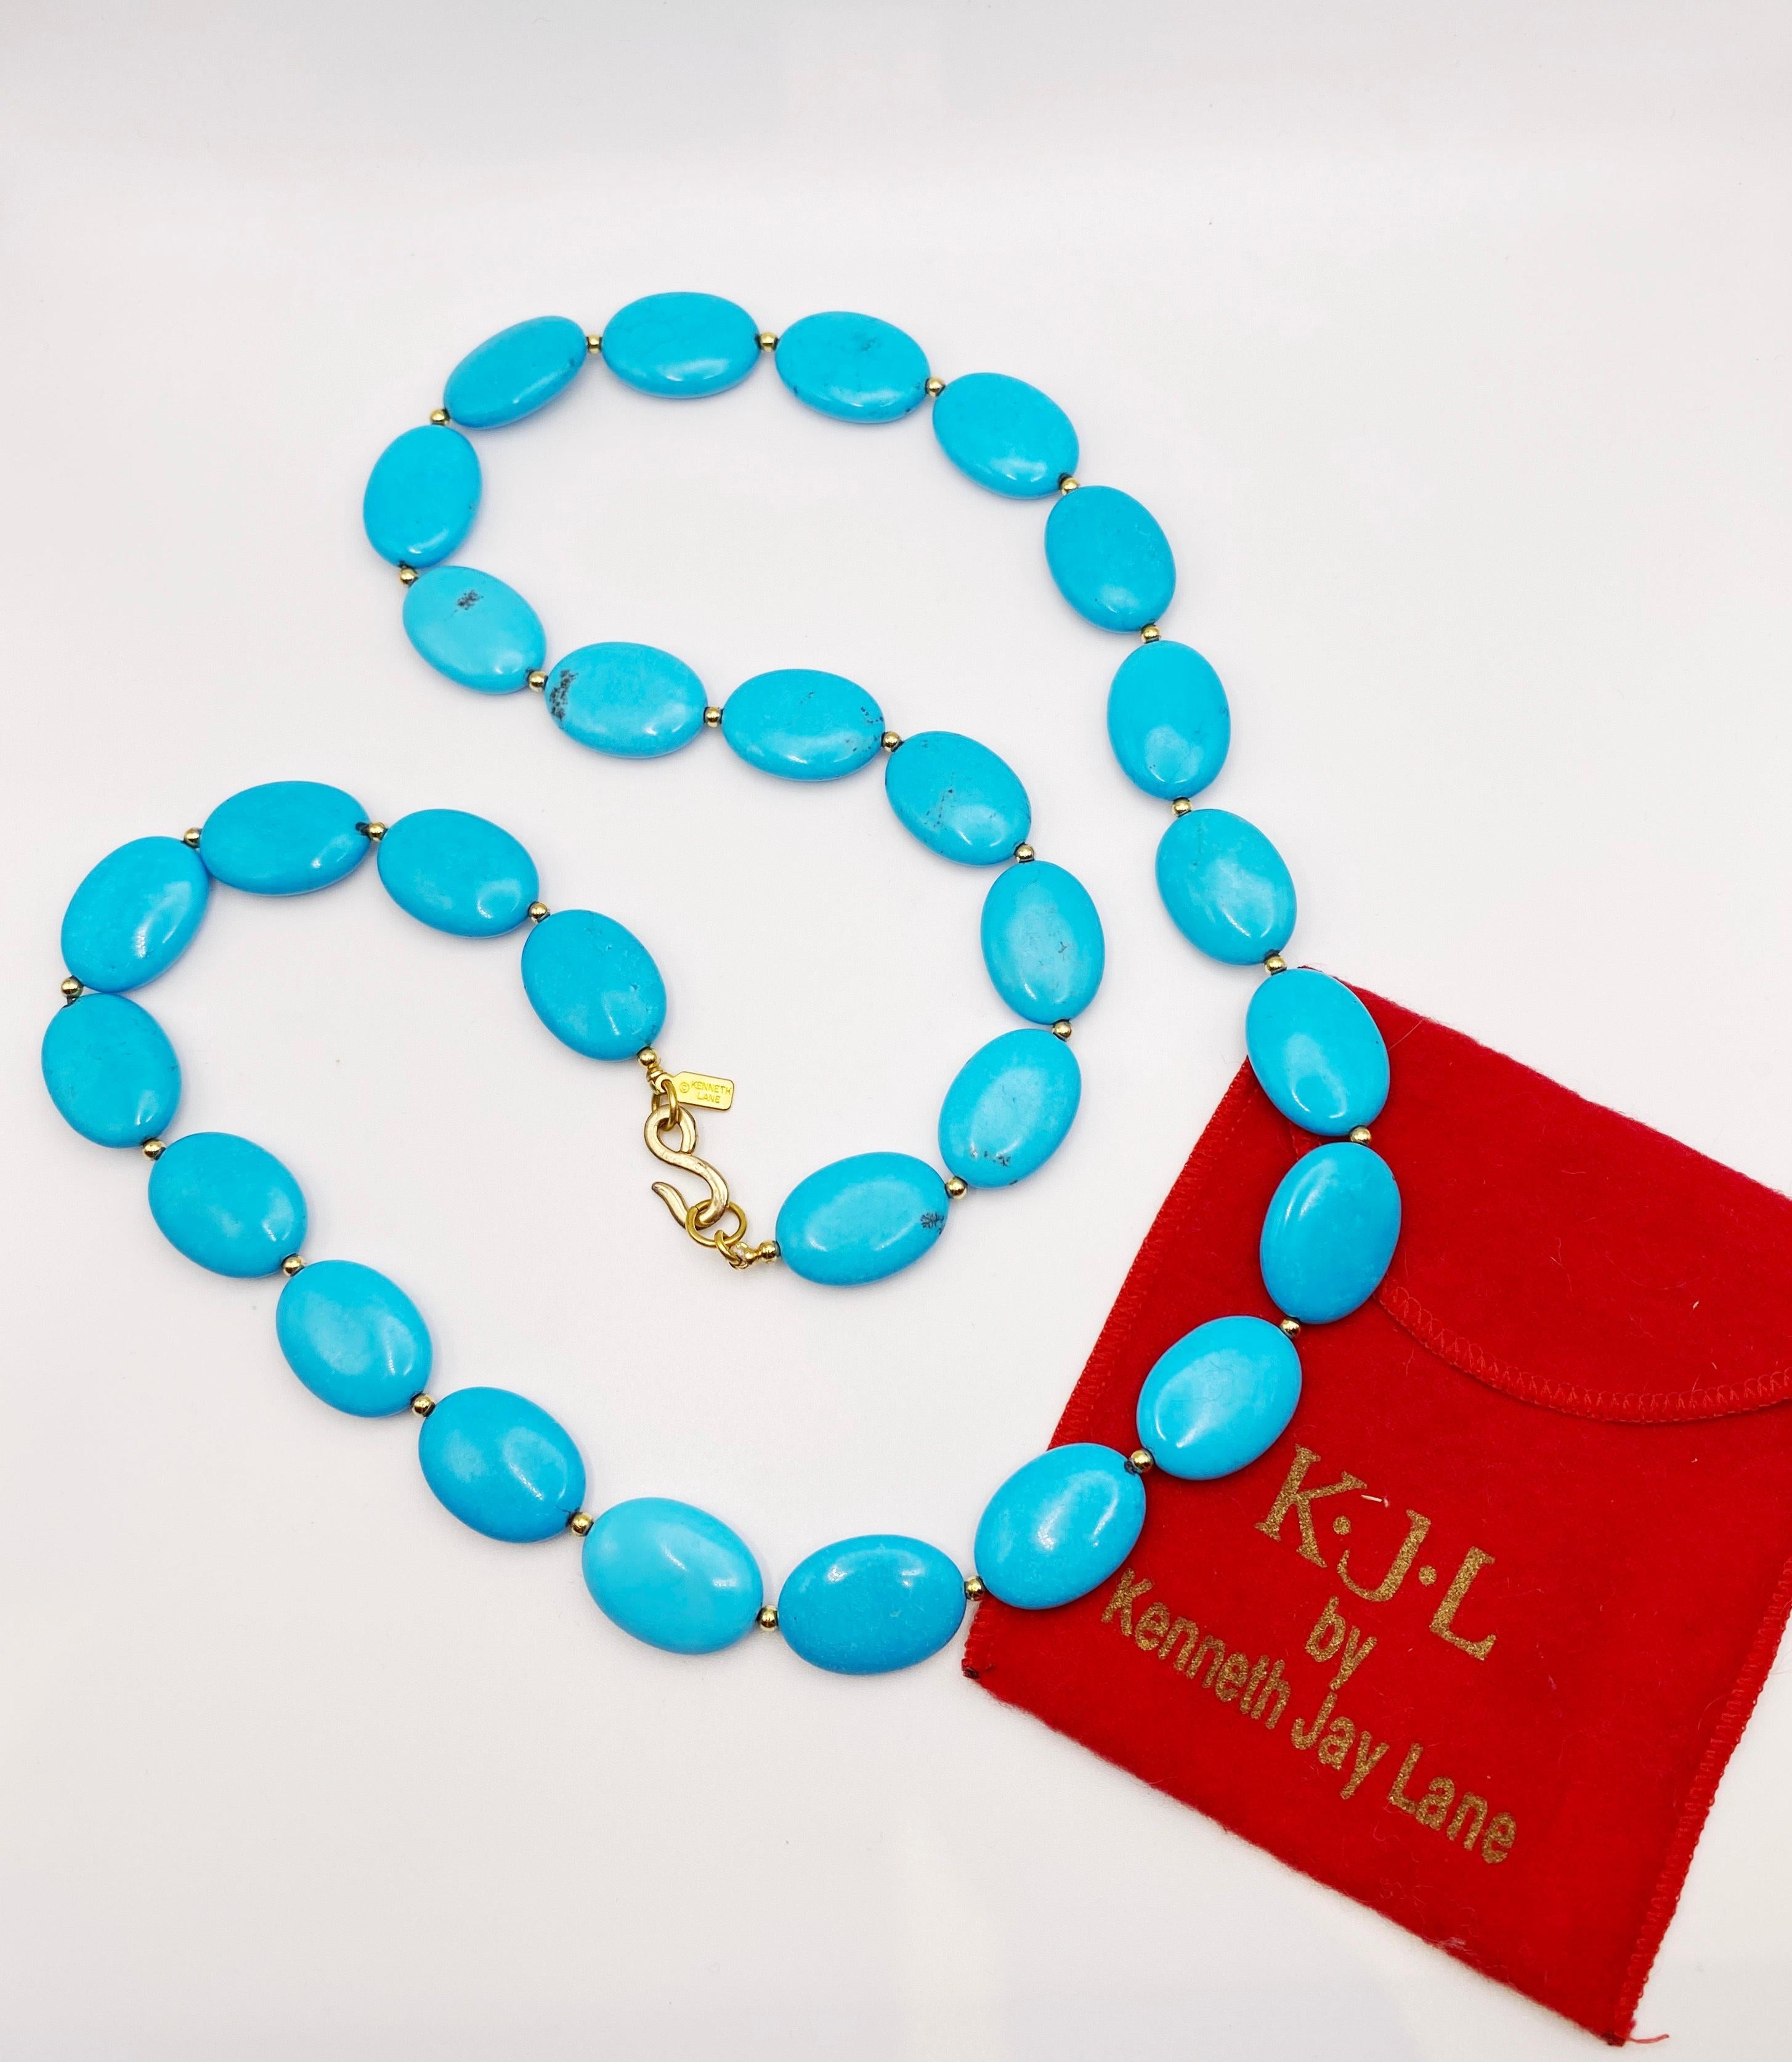 Stunning, rich, faux turquoise bead necklace by Kenneth Jay Lane.  Original pouch also included.  S clasp fitting. Circa, 1990s. Excellent condition. 